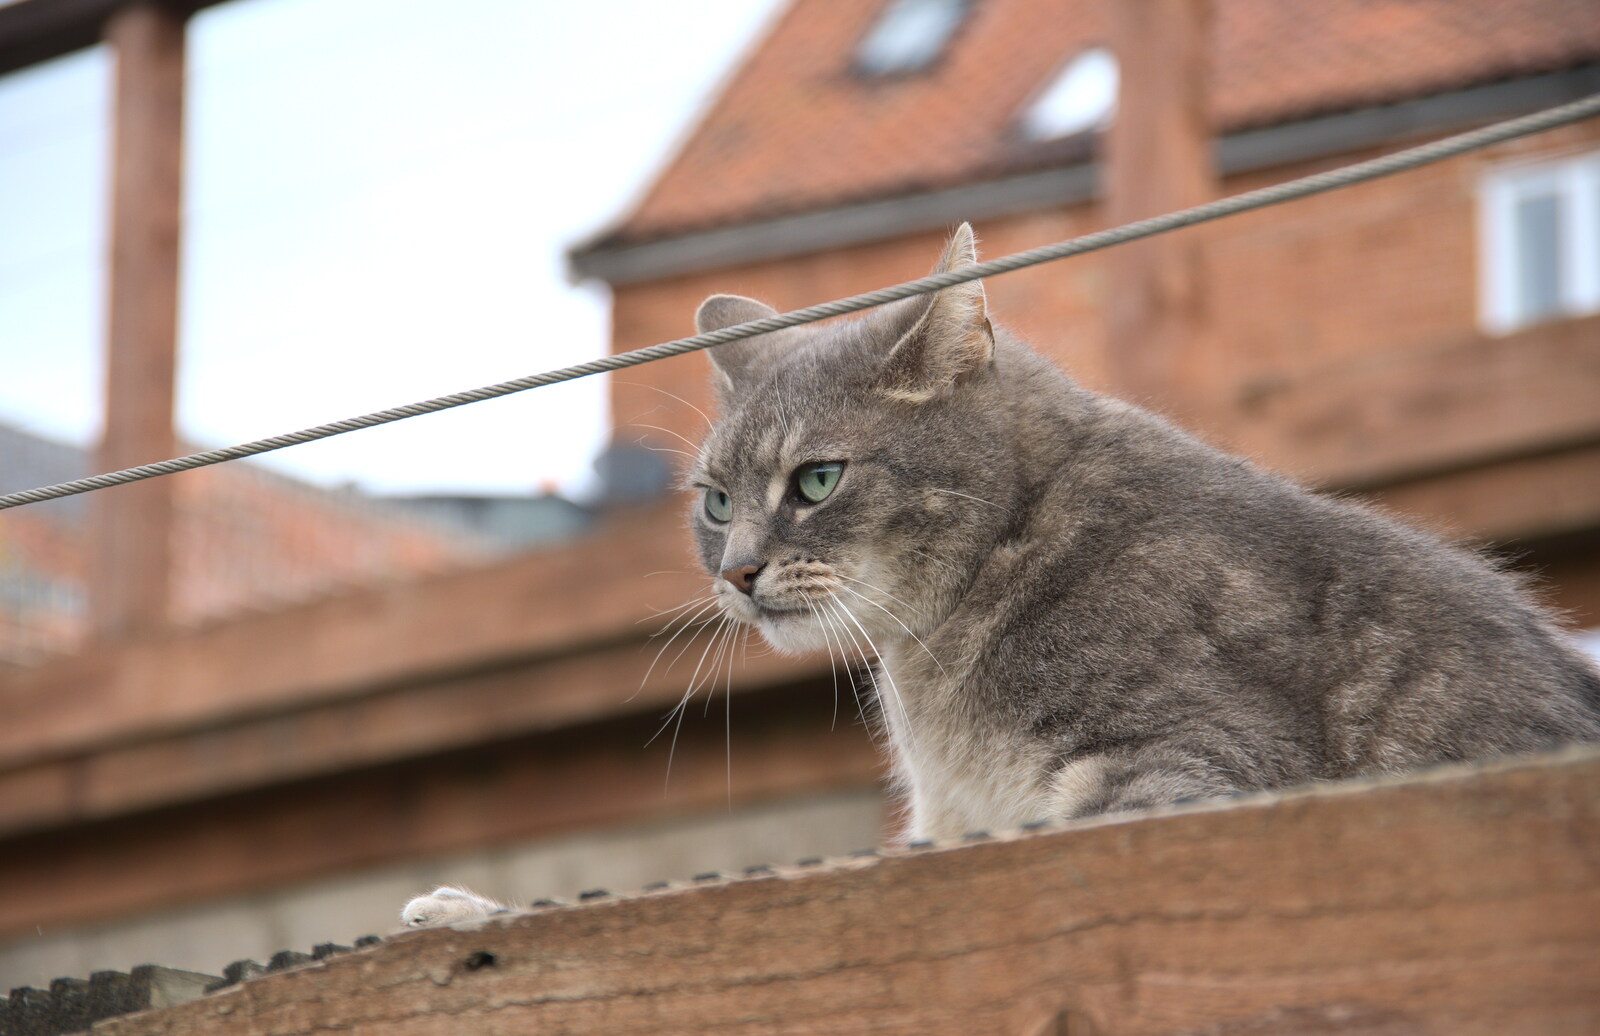 A Trip Down South, New Milton, Hampshire - 9th April 2022: The stripey grey cat looks out over Diss